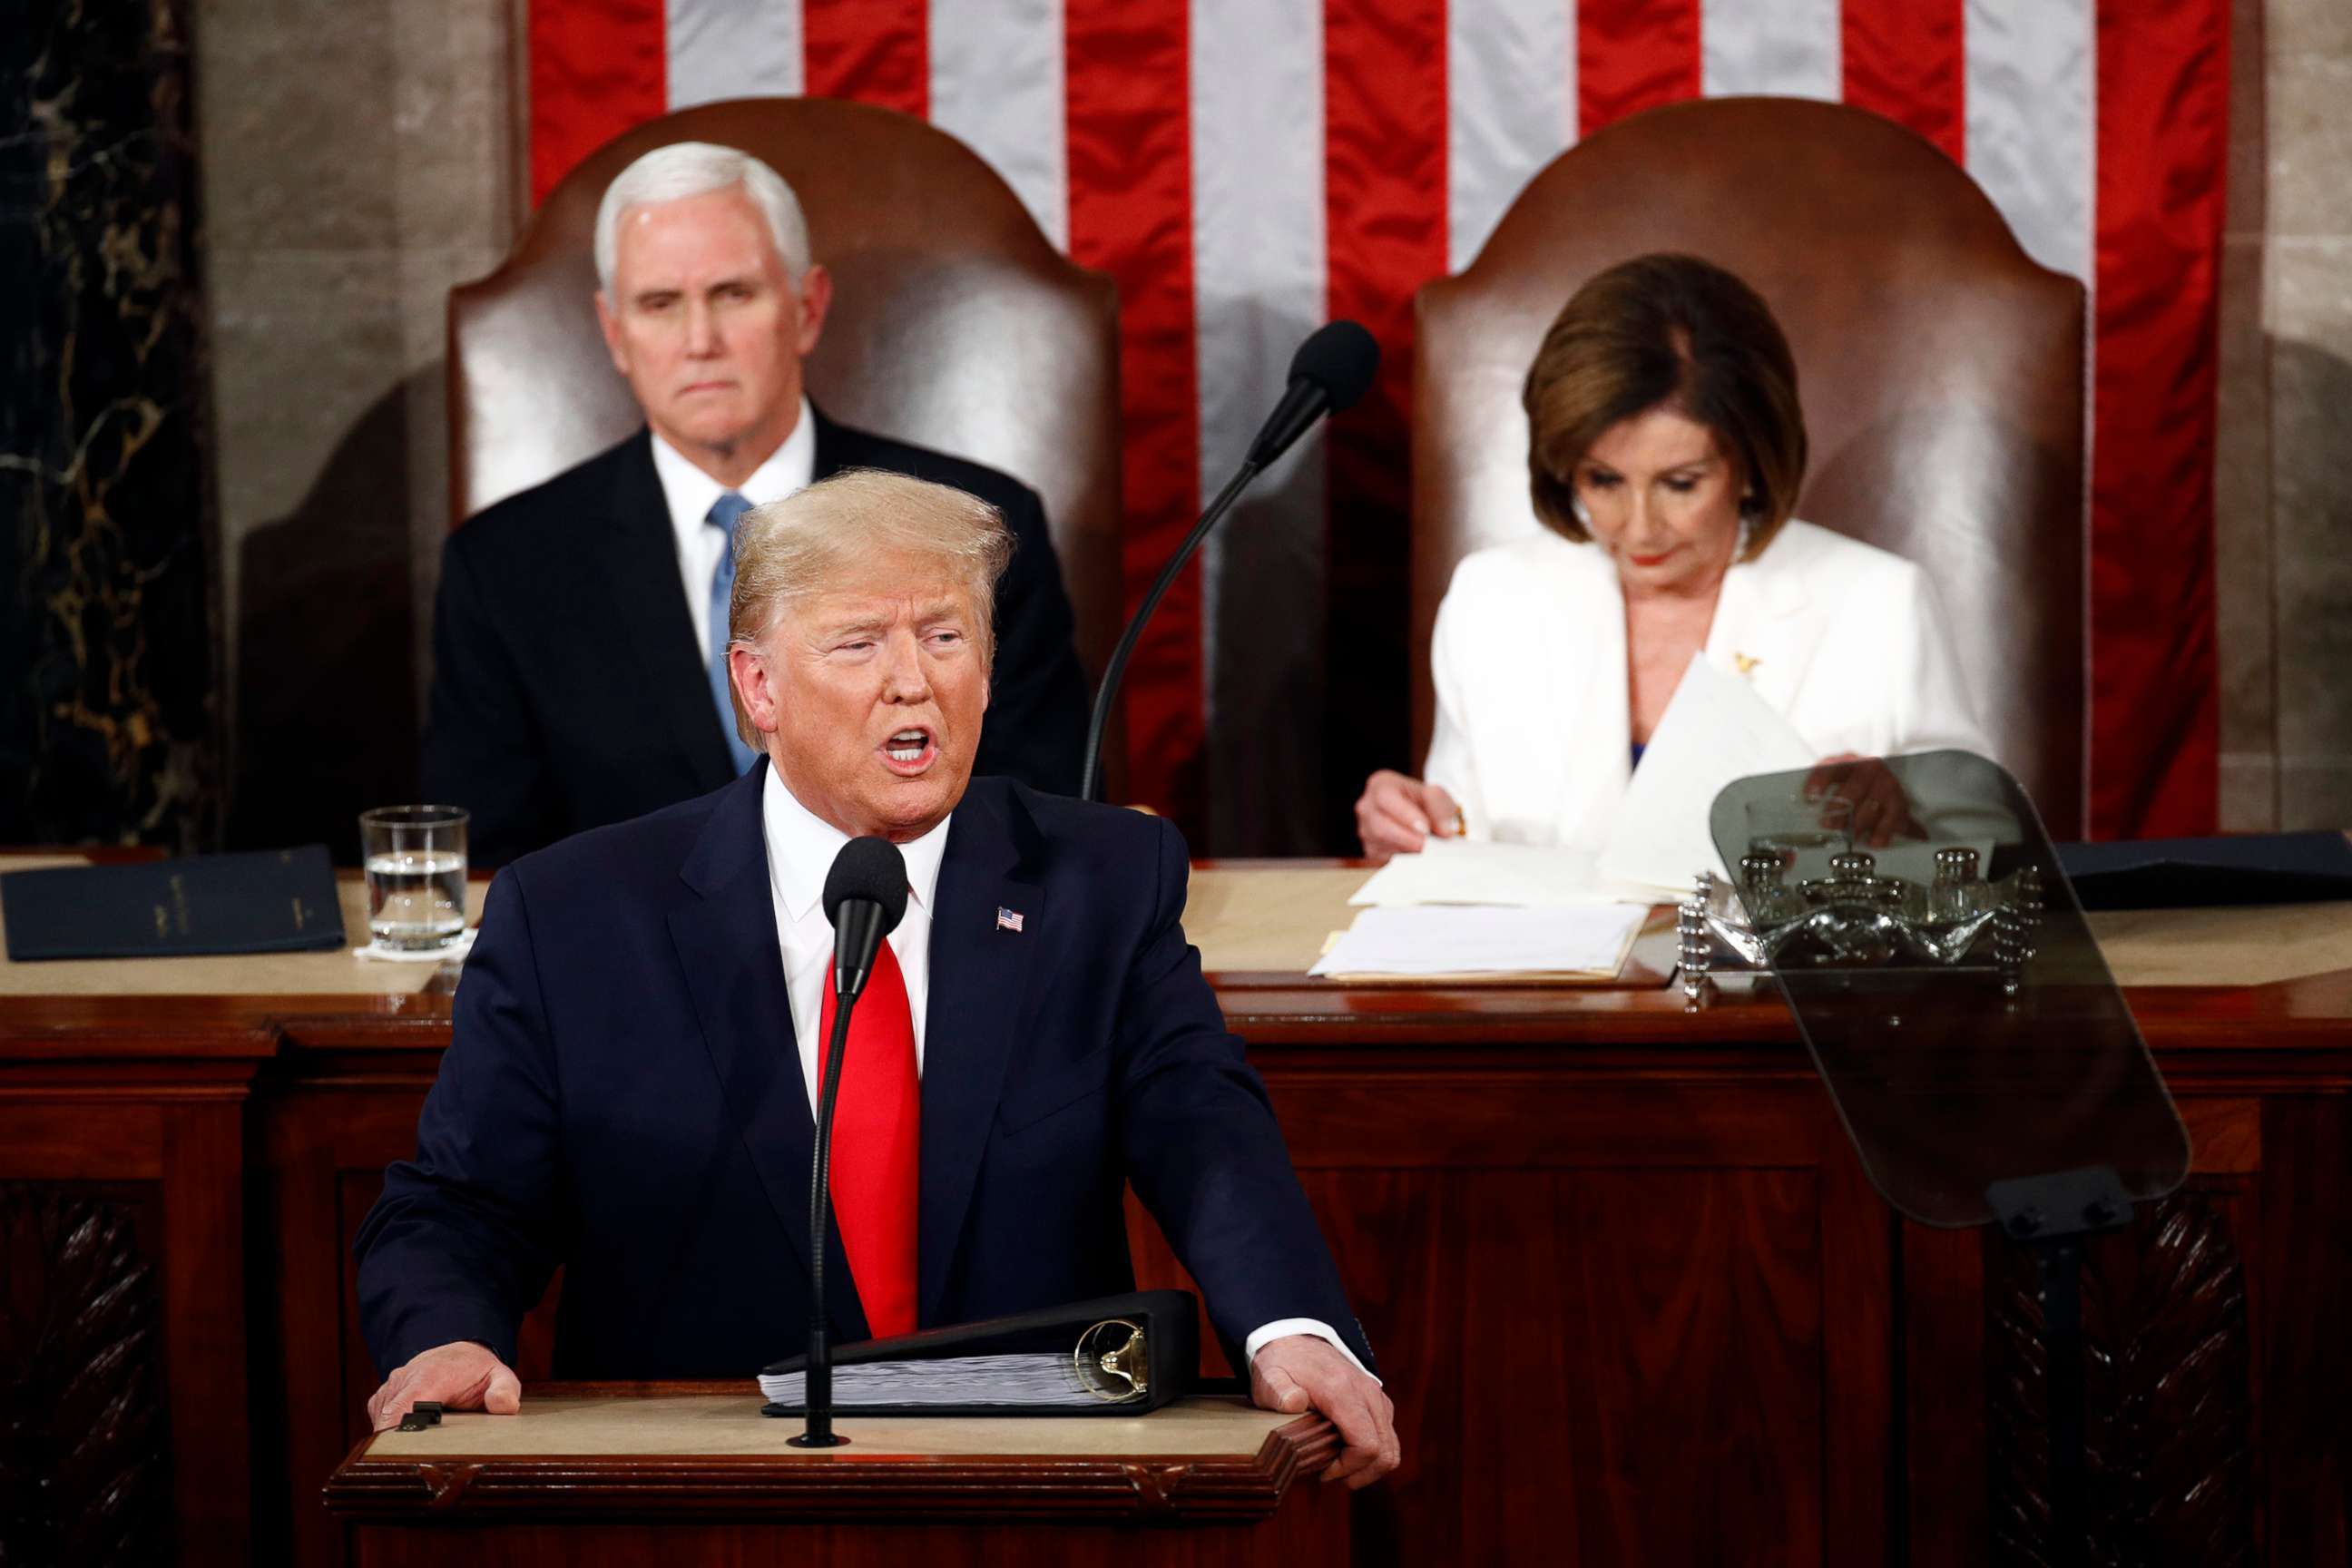 PHOTO: President Donald Trump delivers his State of the Union address to a joint session of Congress on Capitol Hill in Washington, Feb. 4, 2020, as Vice President Mike Pence and House Speaker Nancy Pelosi watch.